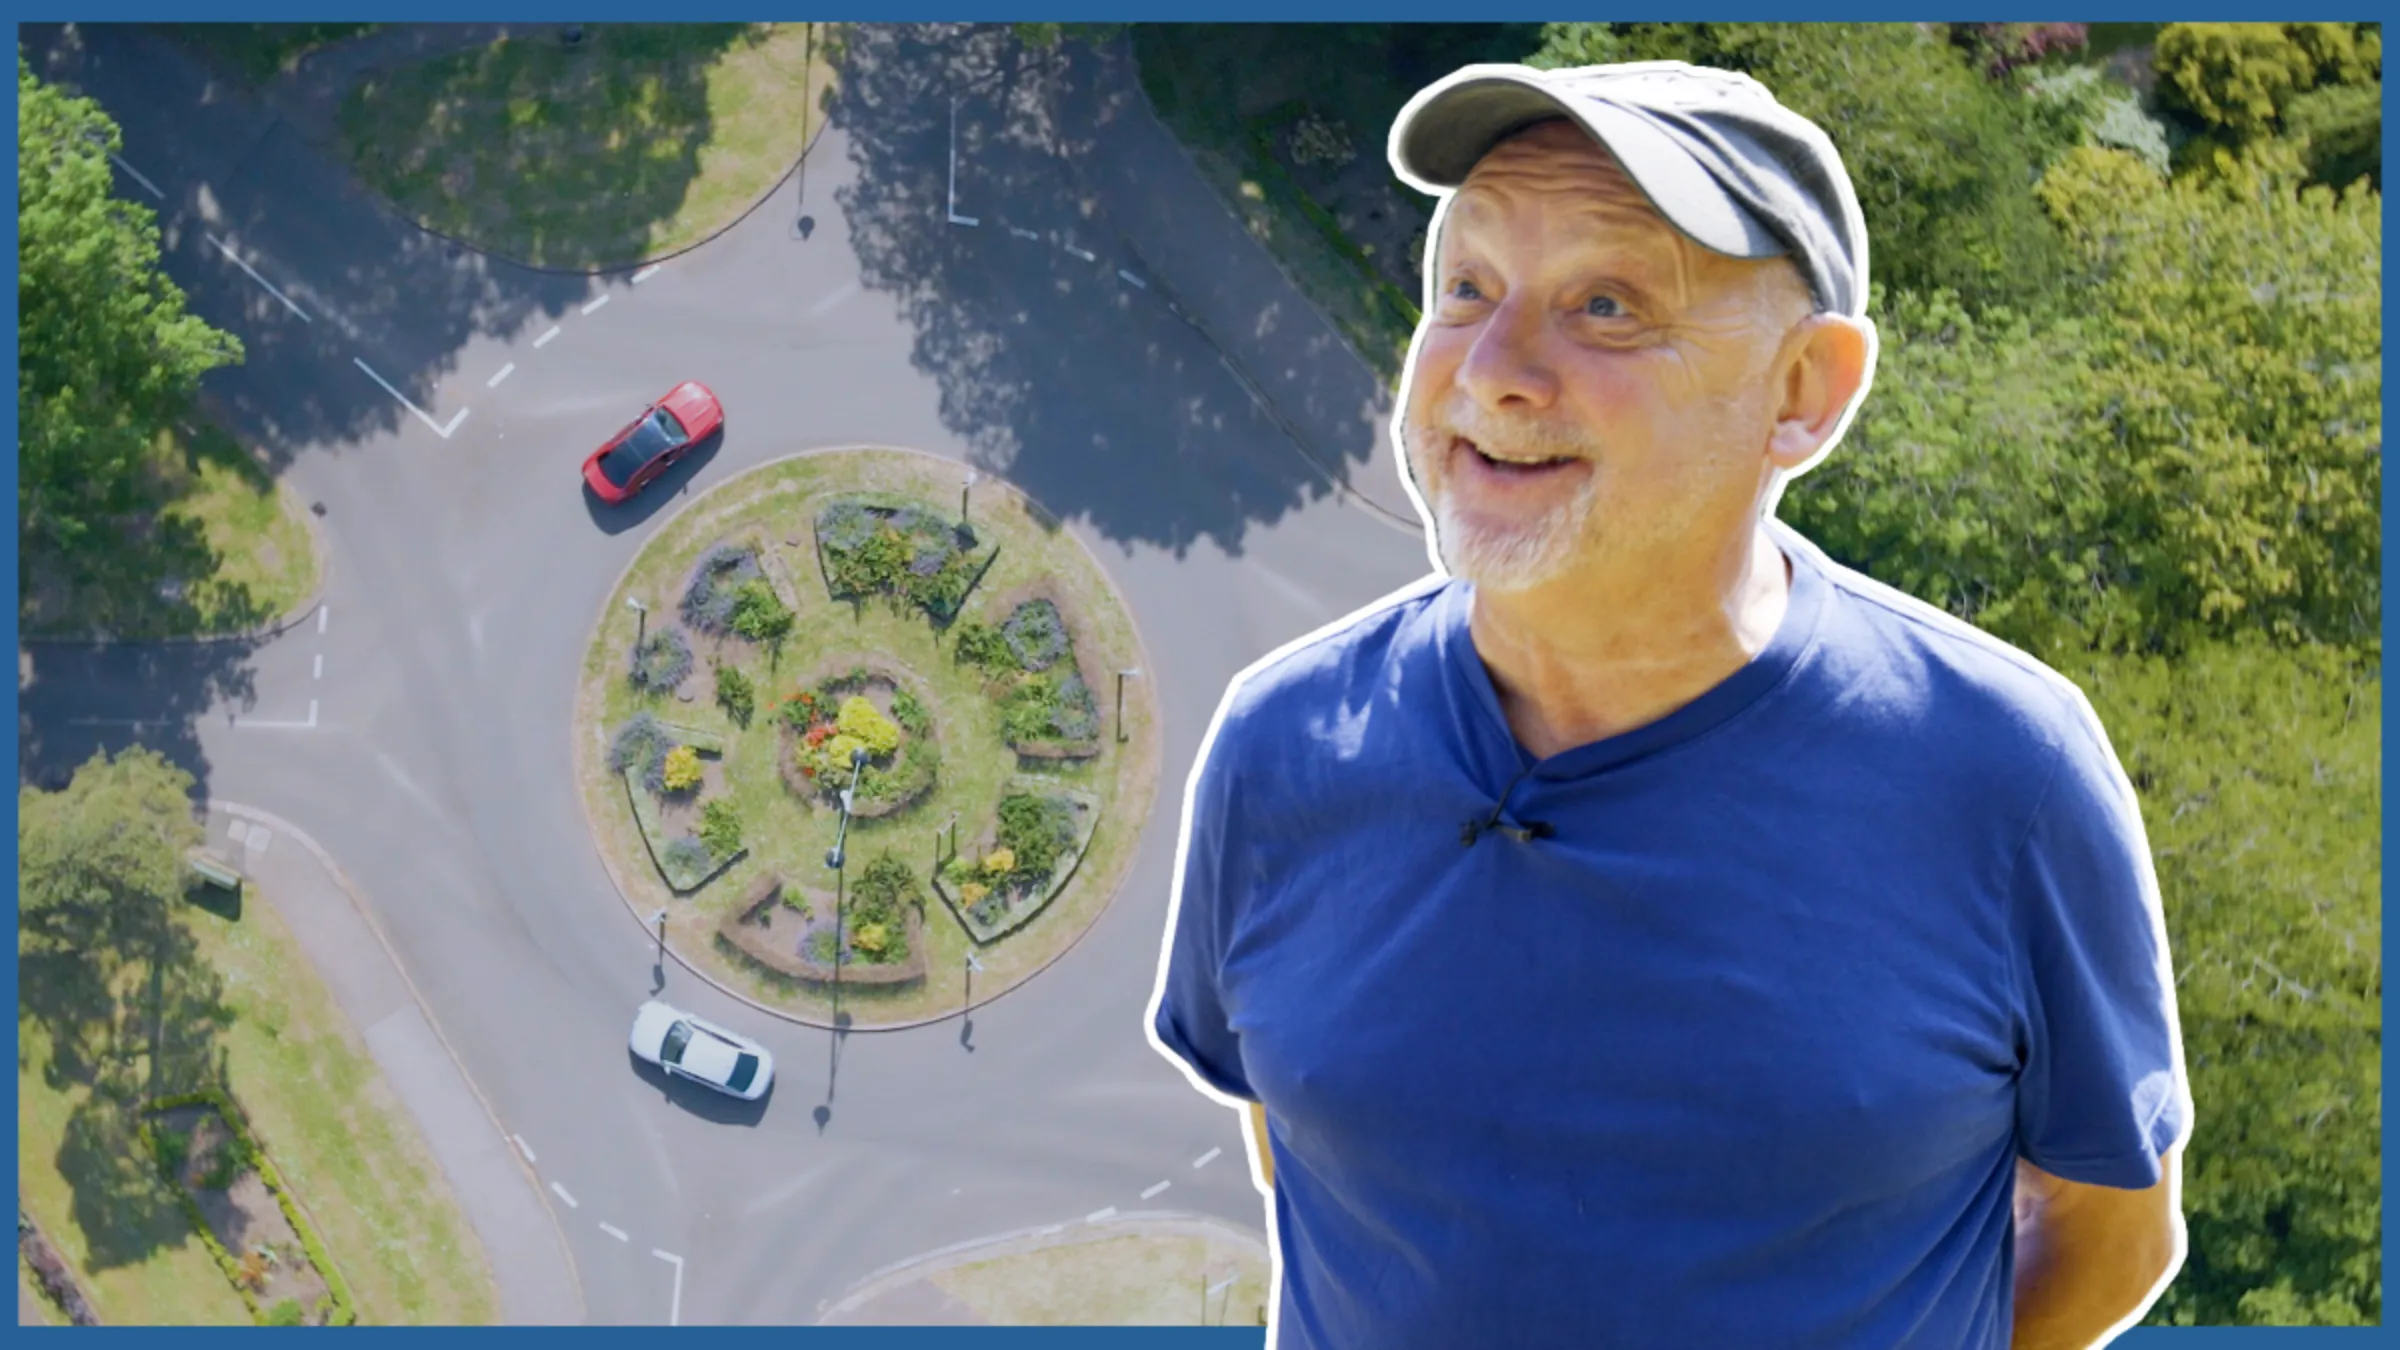 Kevin Beresford, chair of the UK Roundabout Appreciation Society, stands in front of a roundabout in this composite photo. Fintan McDonnell/Thomson Reuters Foundation